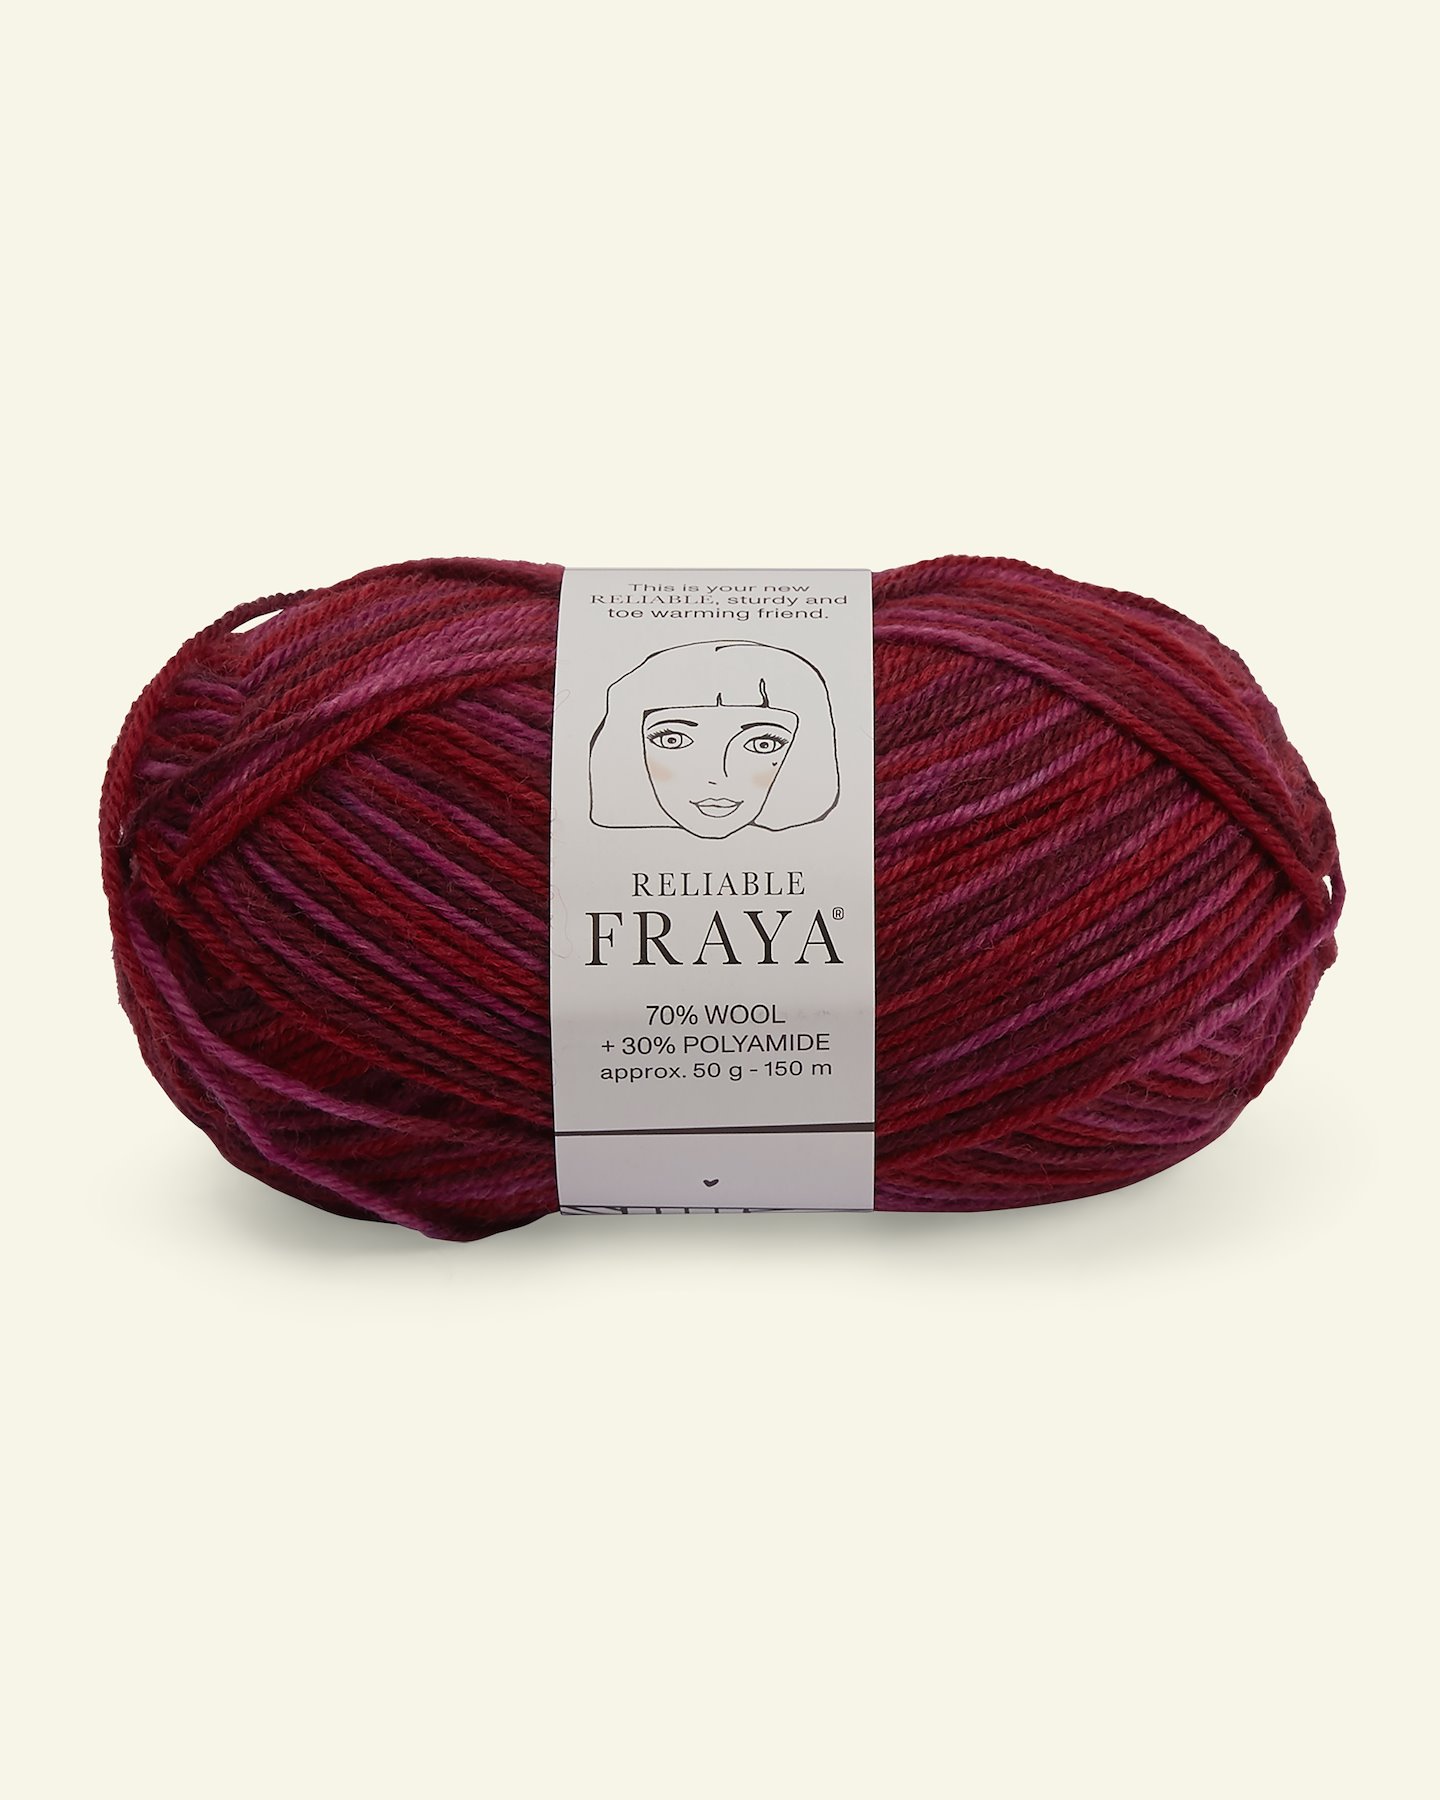 FRAYA, wool yarn "Reliable", pink/red mix col. 90001193_pack